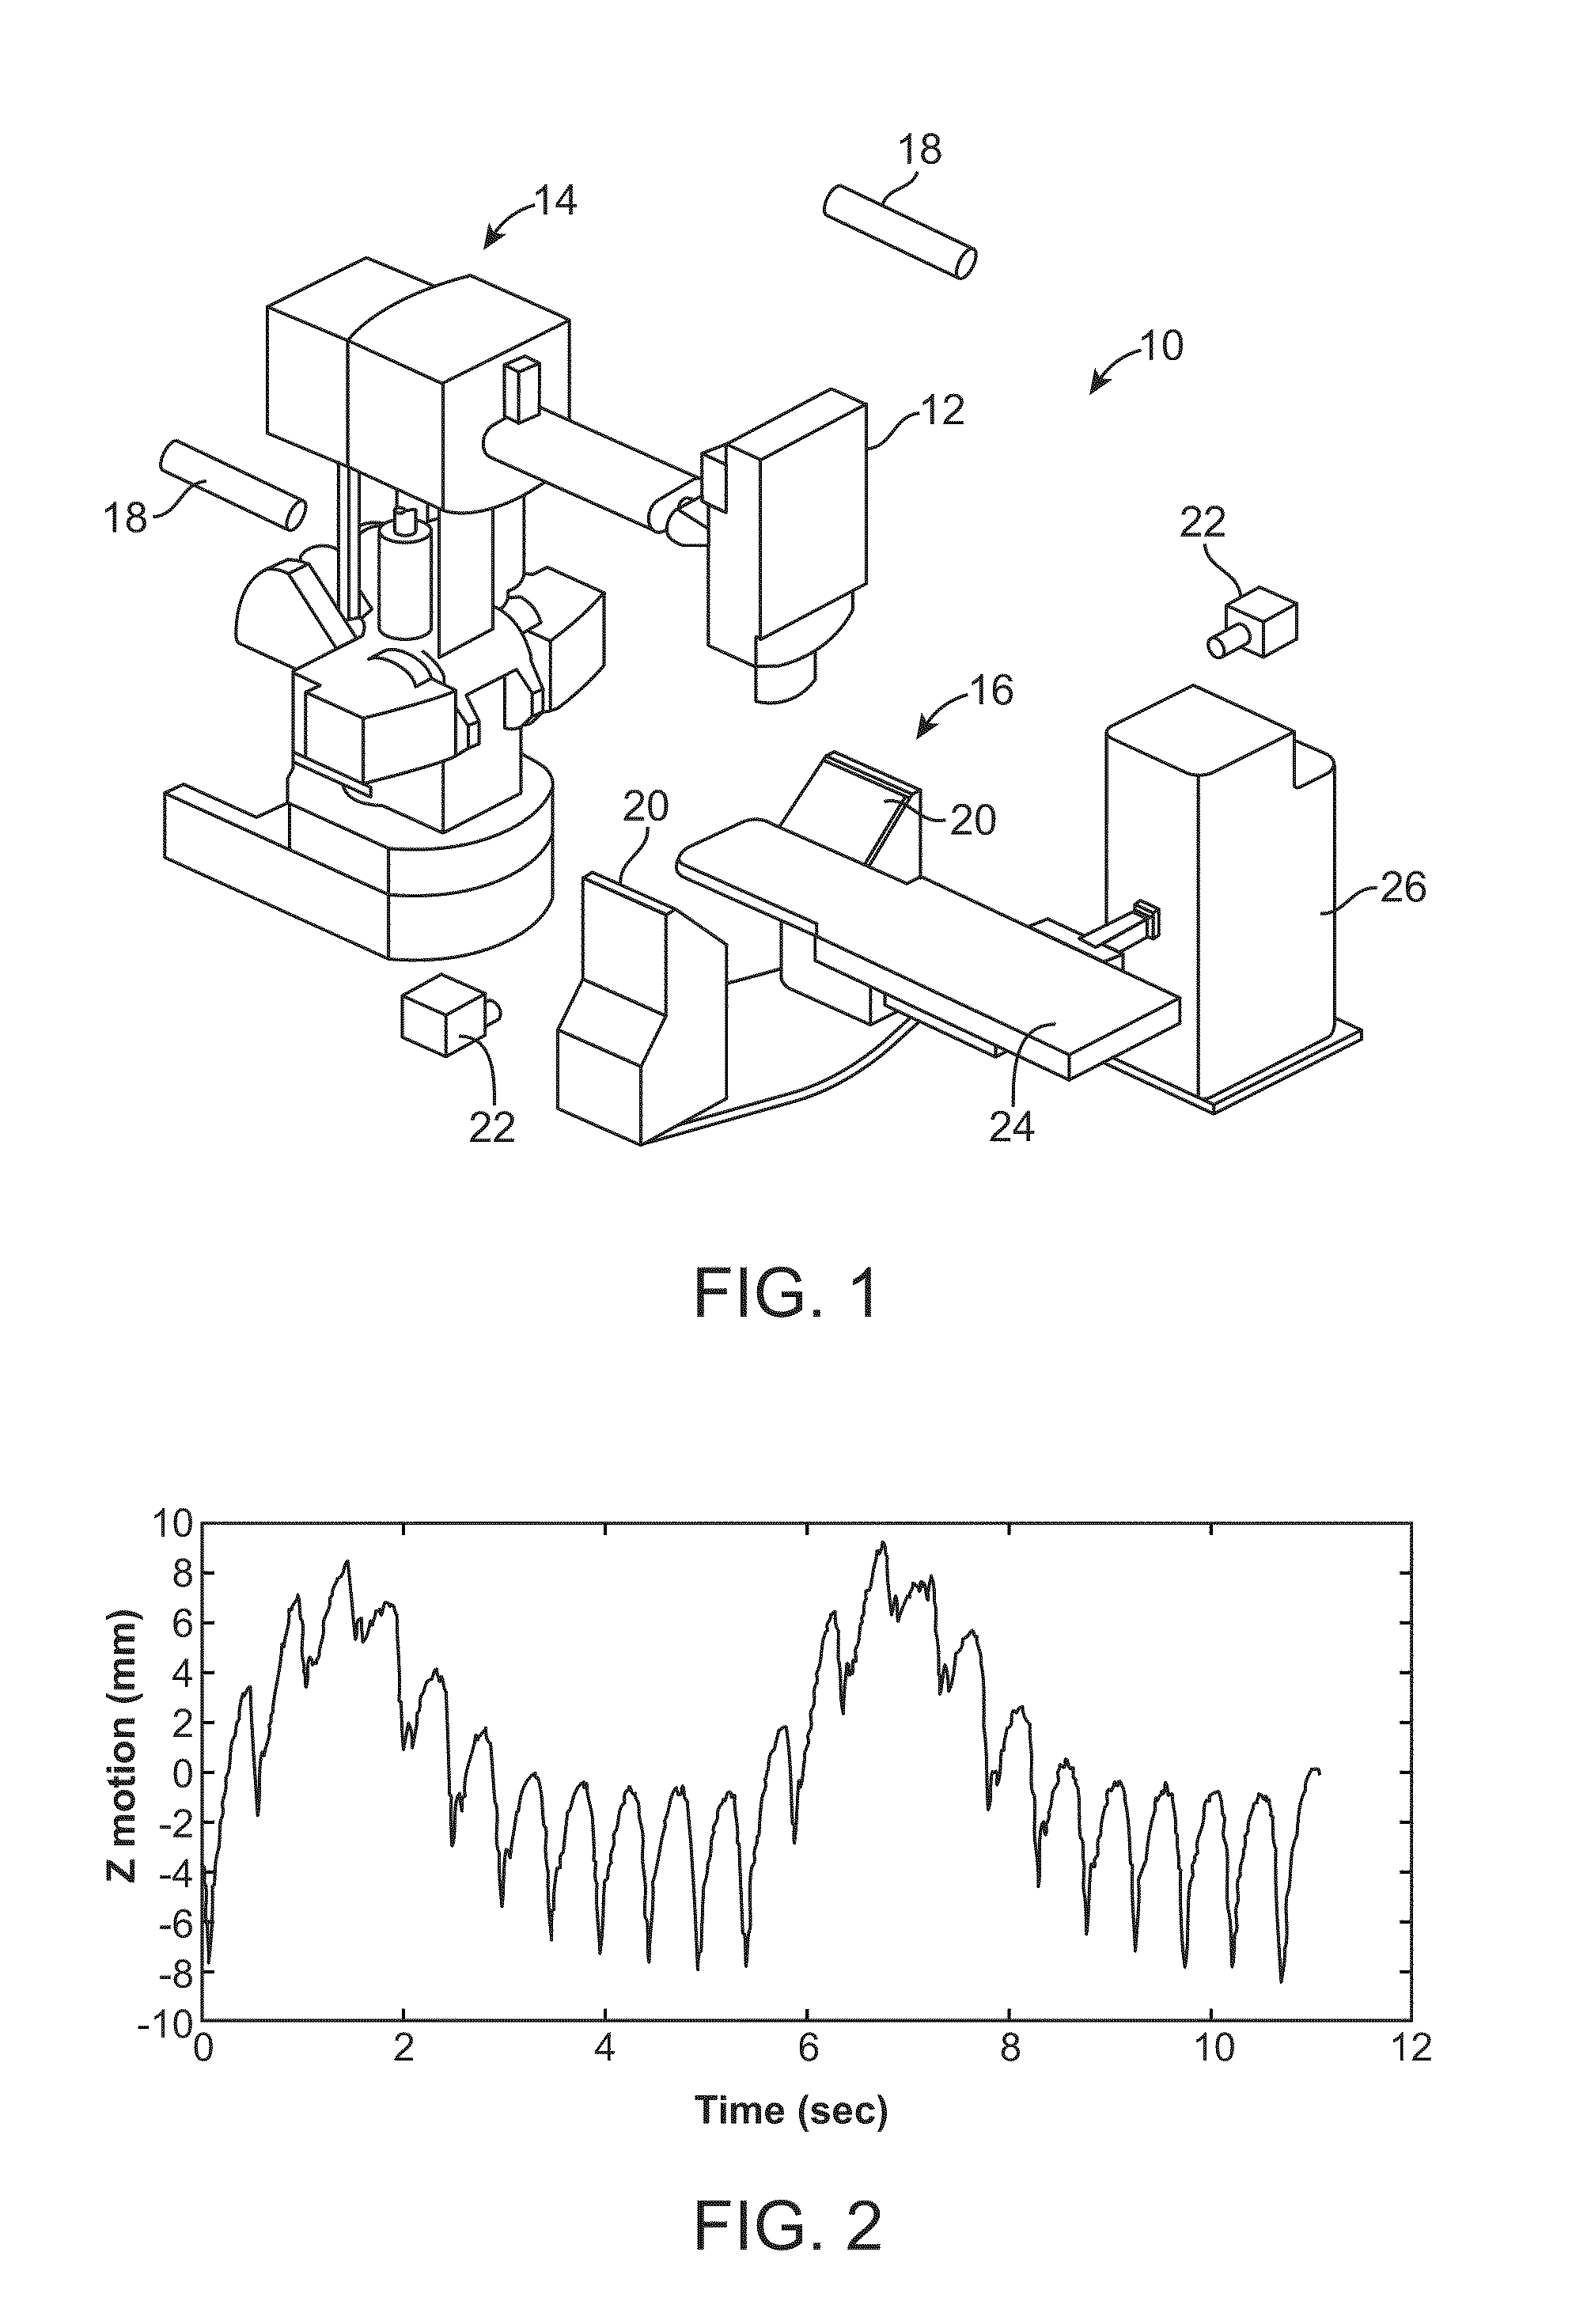 Heart Treatment Kit, System, and Method For Radiosurgically Alleviating Arrhythmia